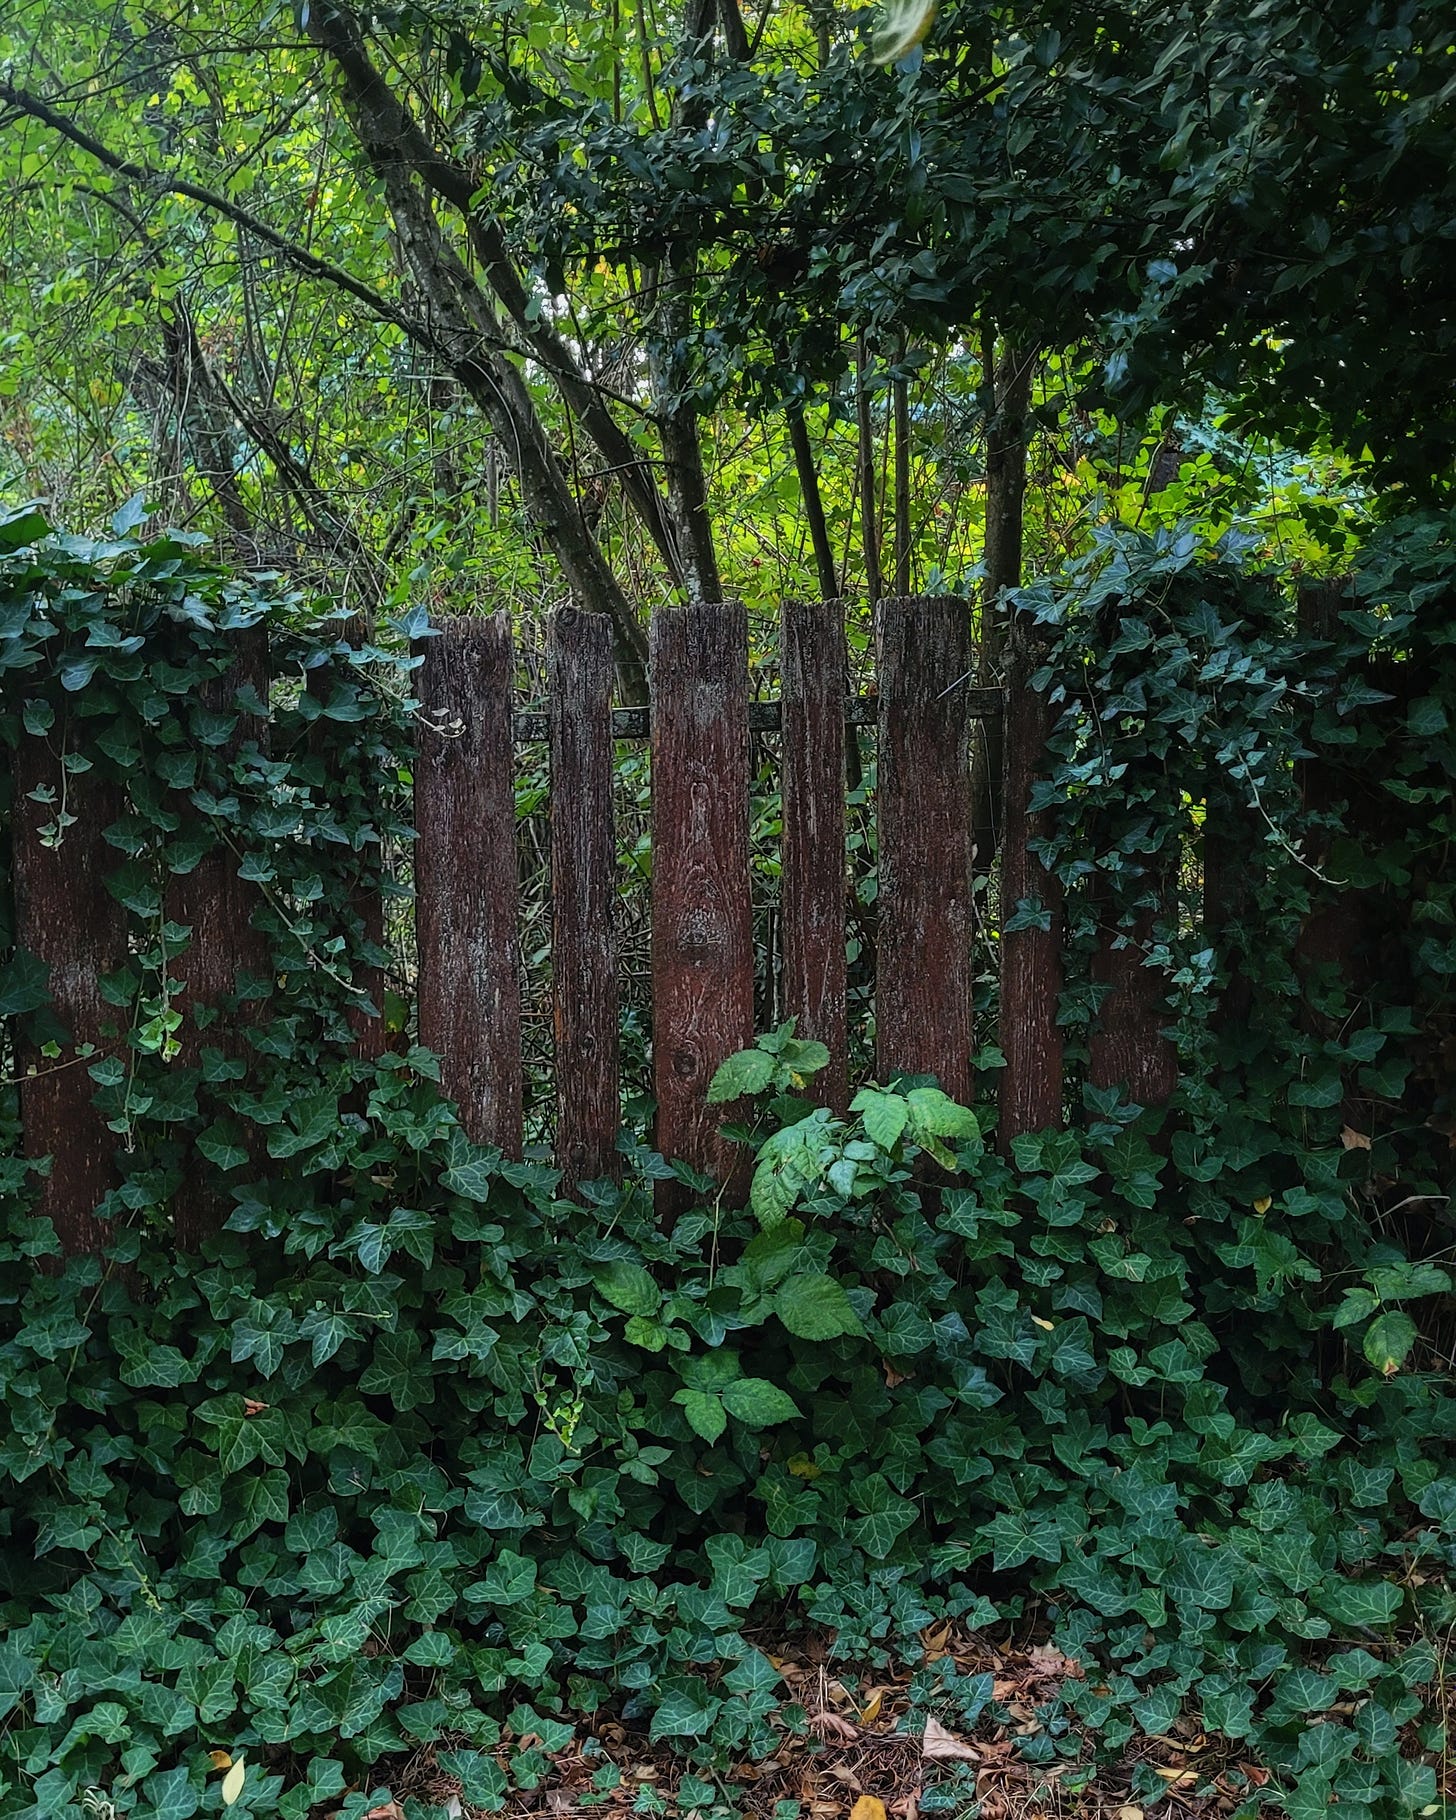 image is a photo of an unkempt old wooden fence overrun with a lush pelt of ivy and crunchy leaves with holly and hazel trees heavy with fruit just on the other side. beyond the fence are more young deciduous trees.